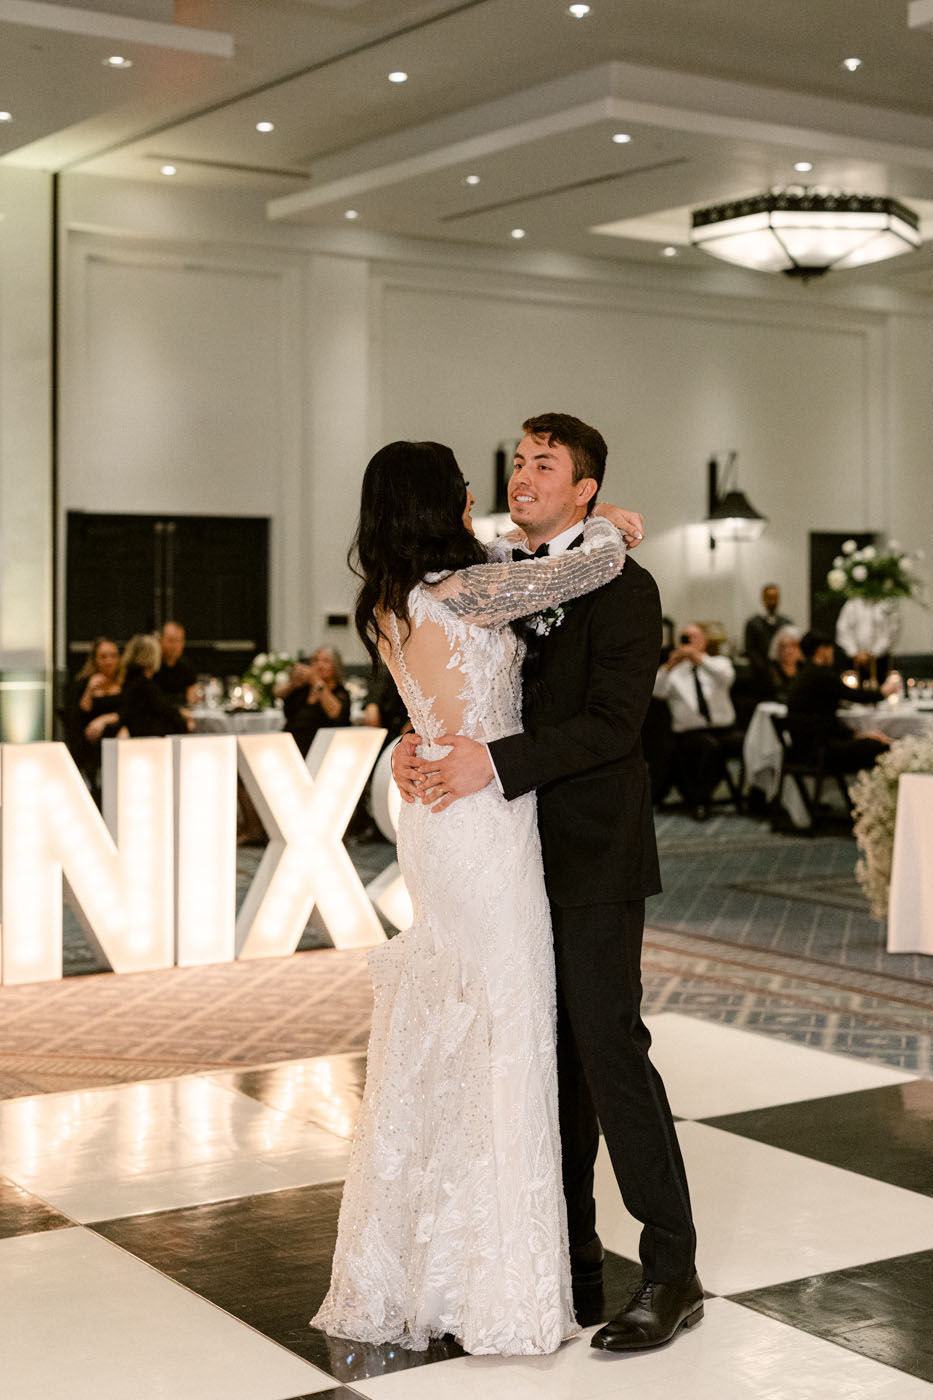 First dance as bride and groom at luxury wedding at the scott resort